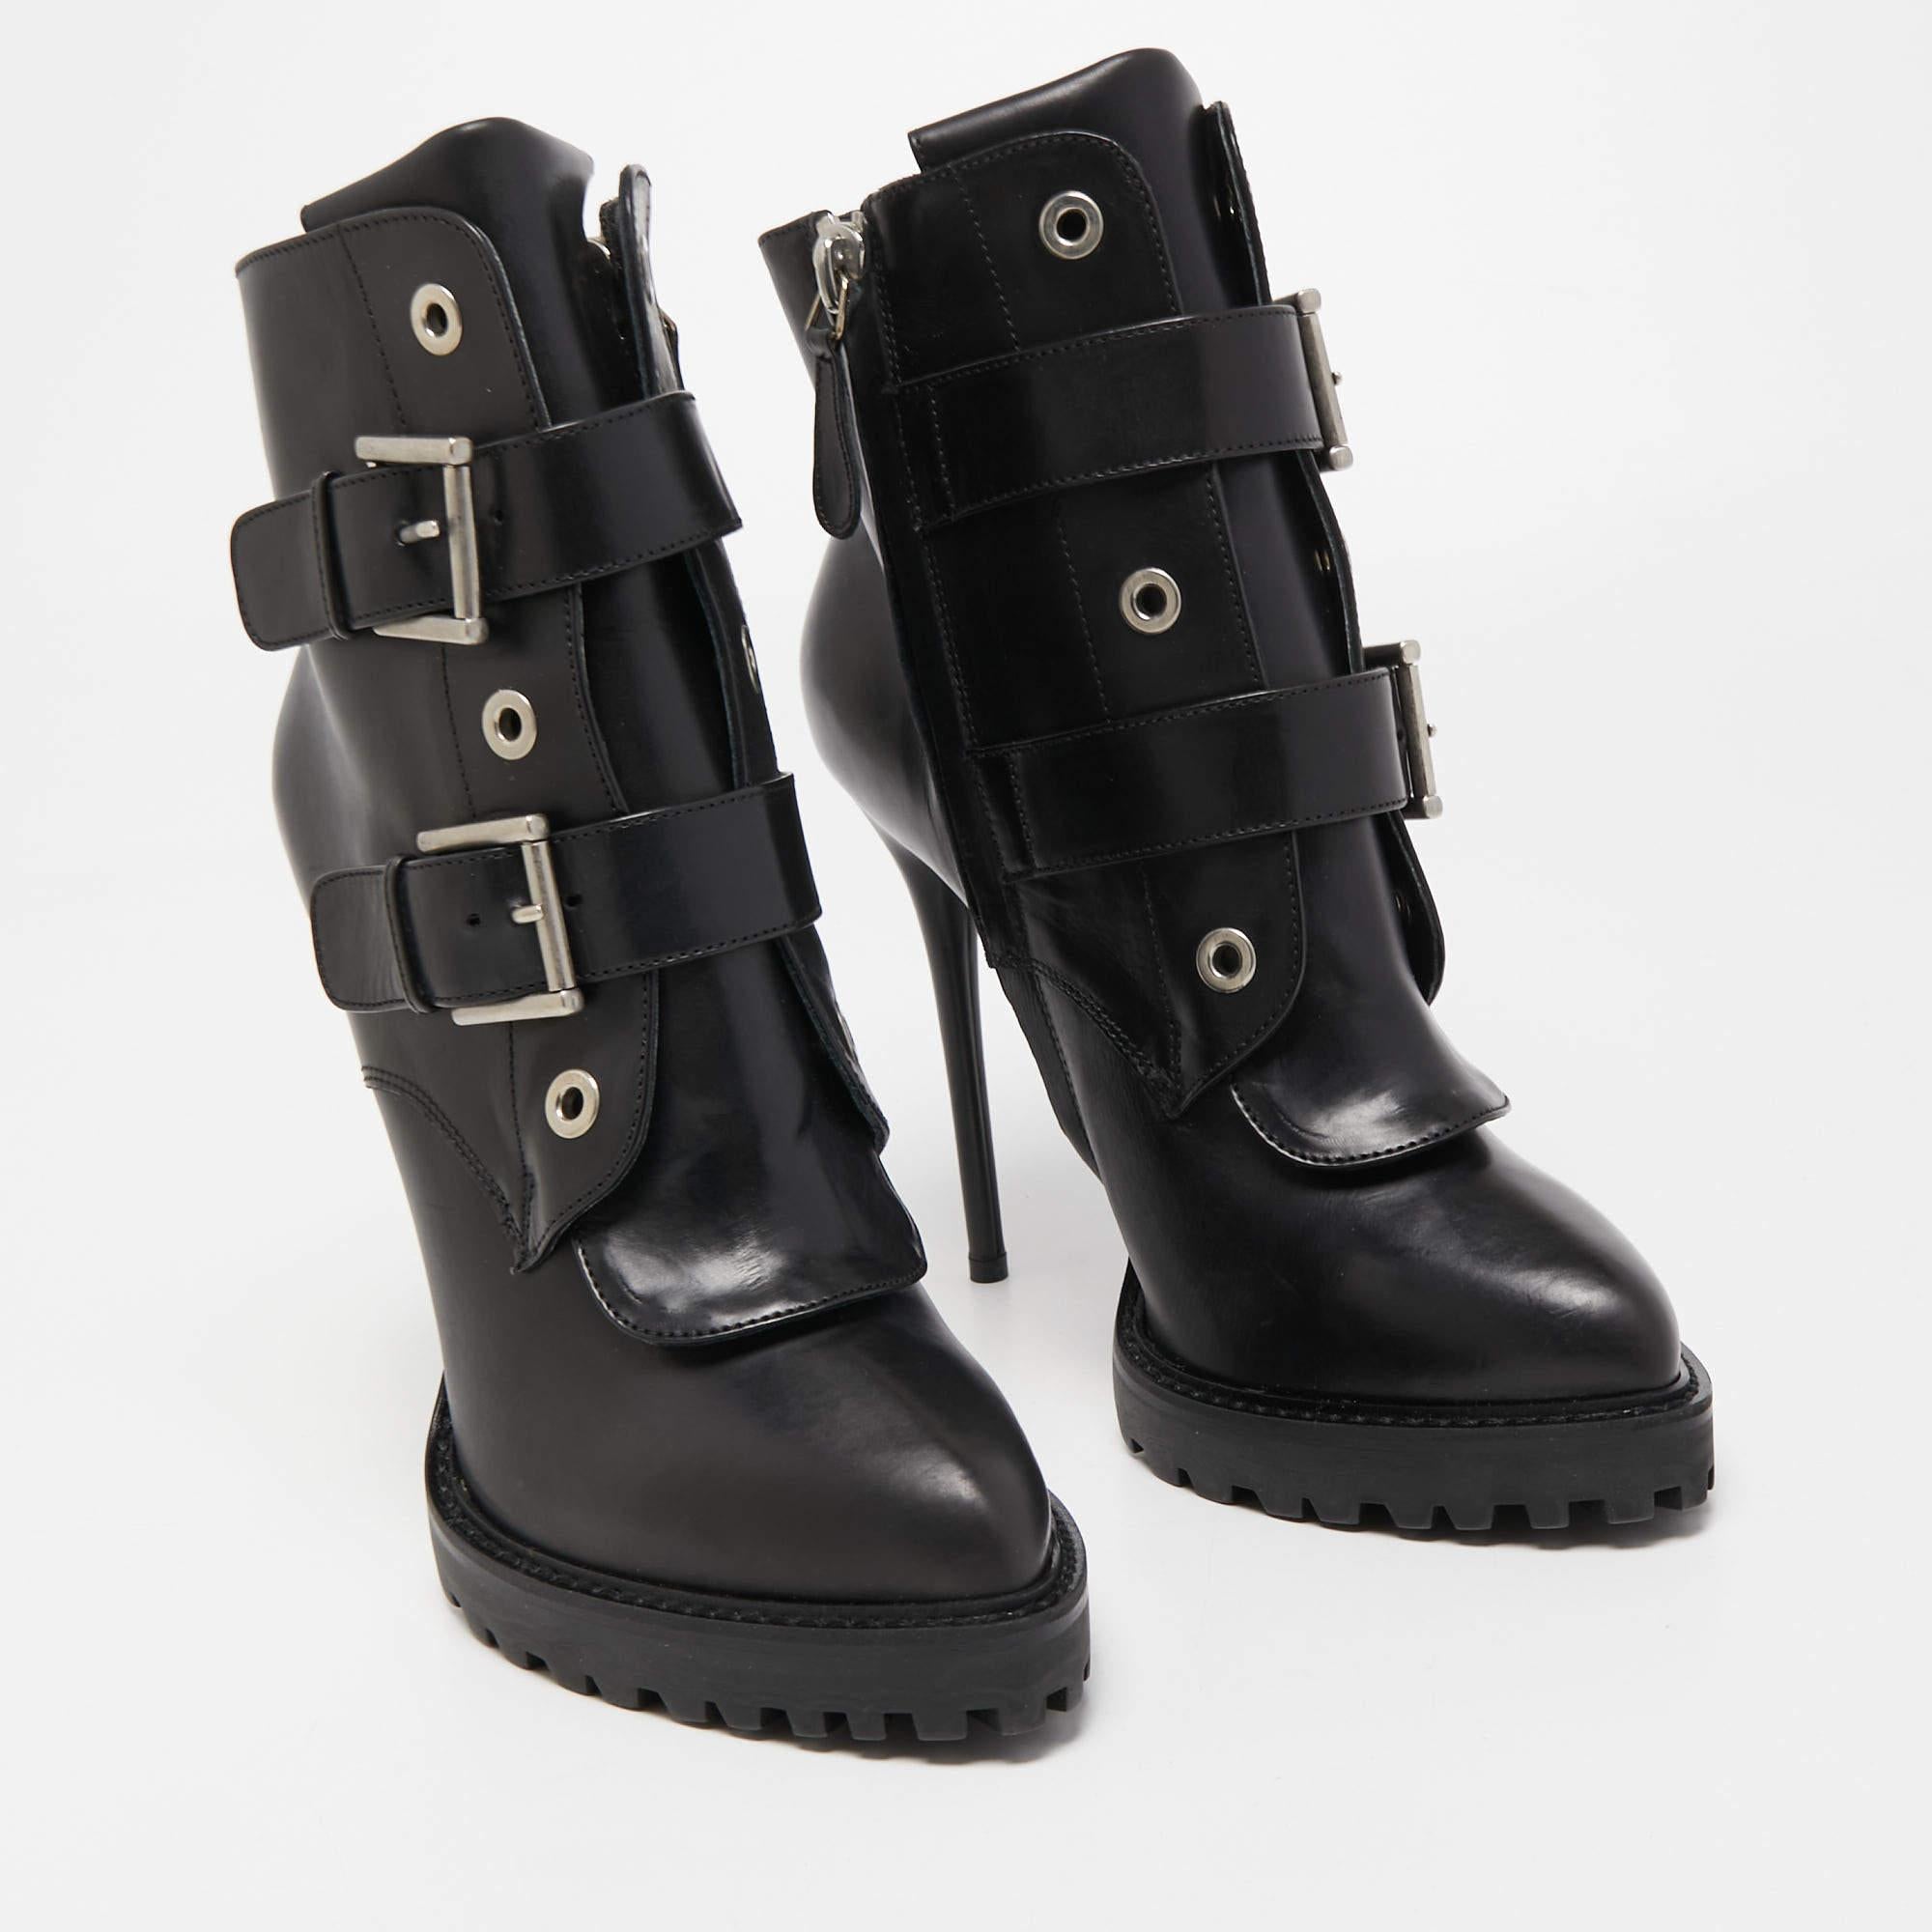 Alexander McQueen Black Leather Buckle Detail Boots Size 40 1